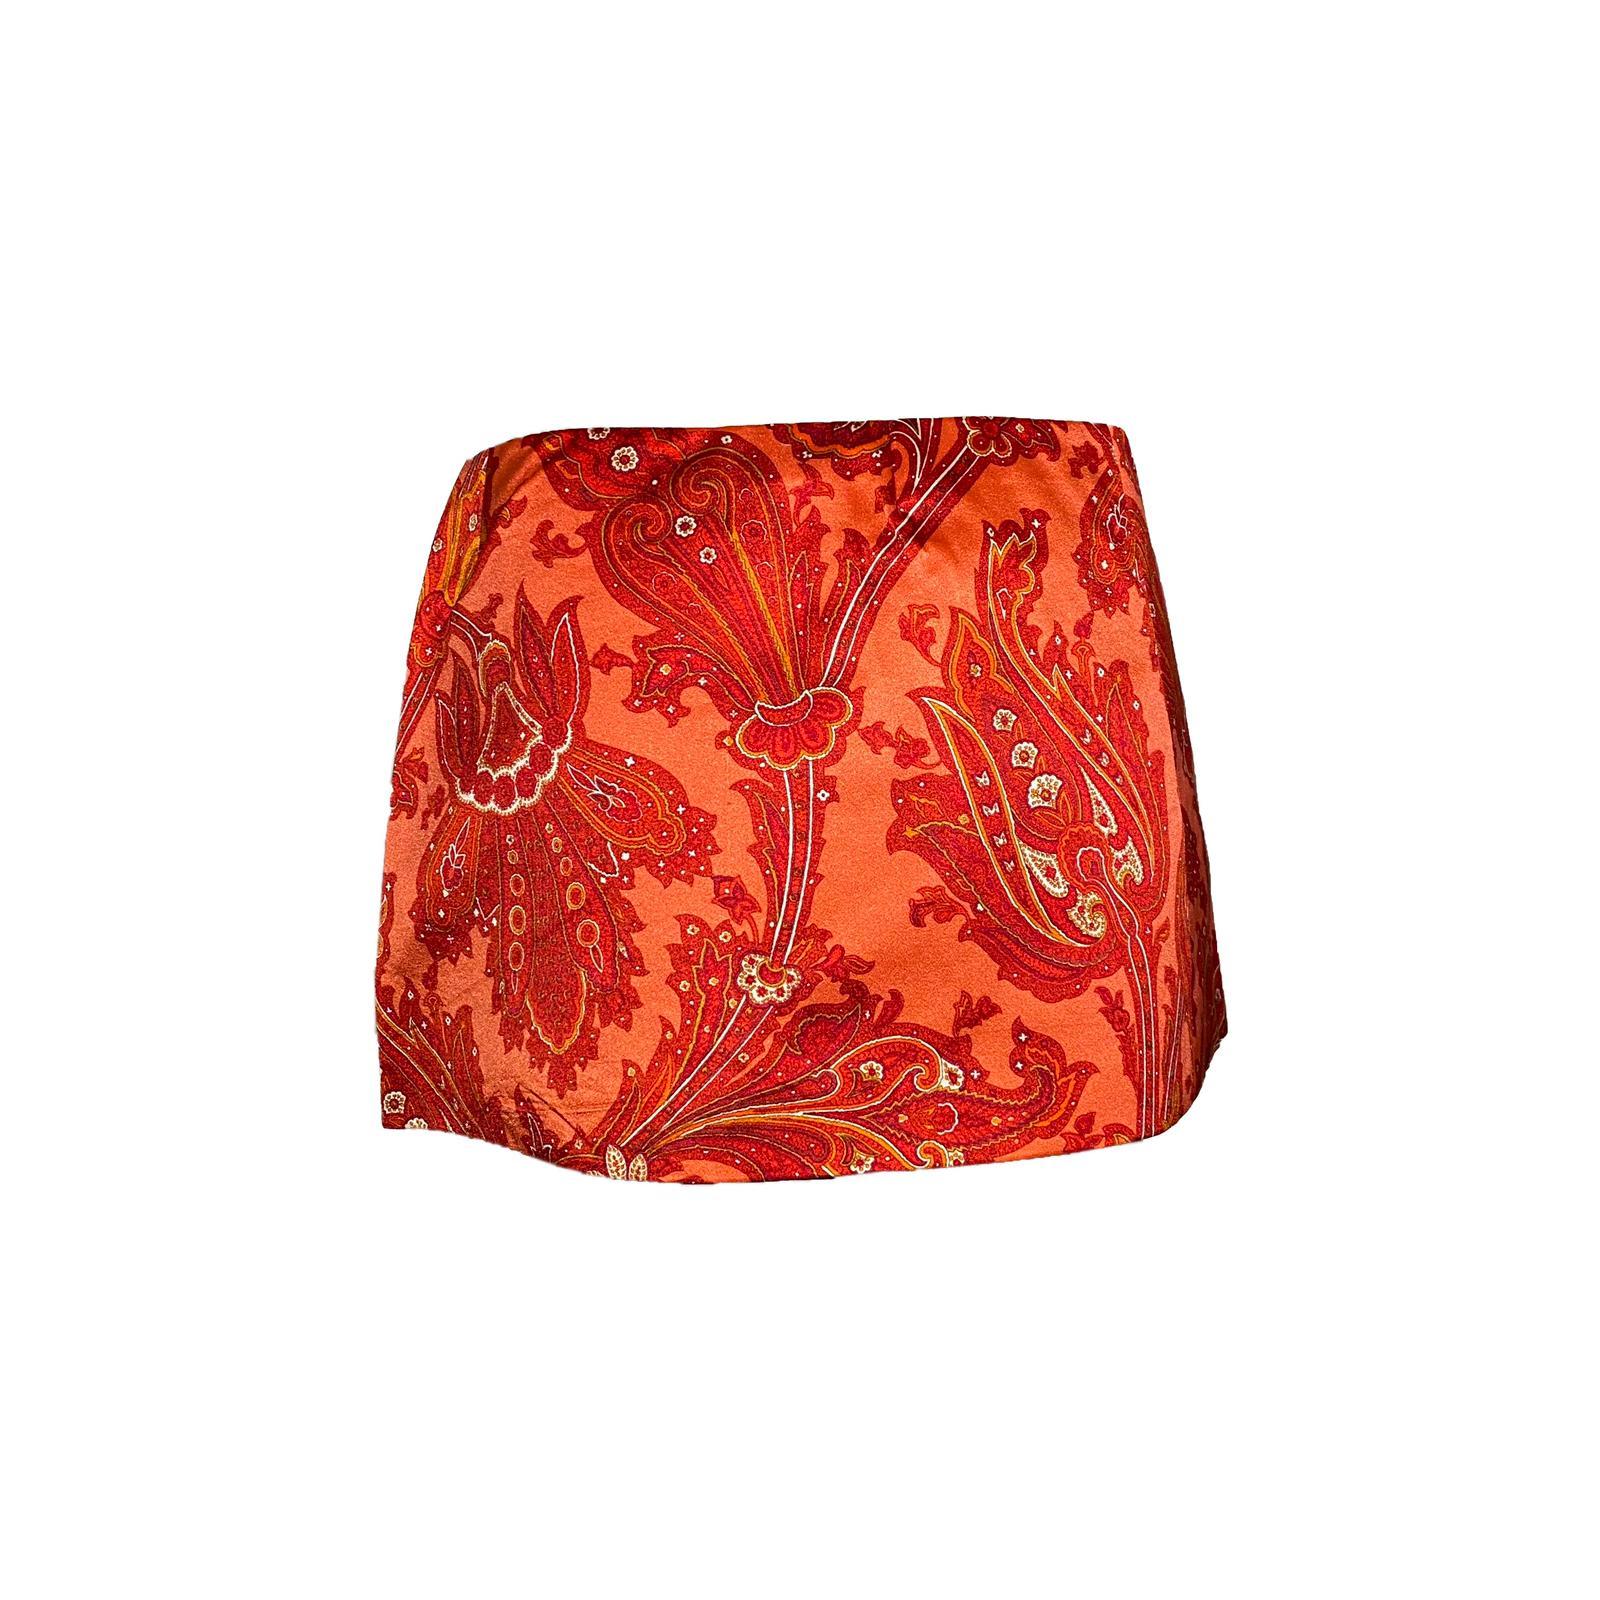 Dolce & Gabbana Runway Silk Red Paisley Mini Skirt with high side Slit from the Spring/Summer 2000 “Mix & Match” collection, as seen on Maggie Rizer on Look 28. Side button fastening.

Size: IT 38

Waistline: 76cm/29,9 inch 
Length: 28cm/11